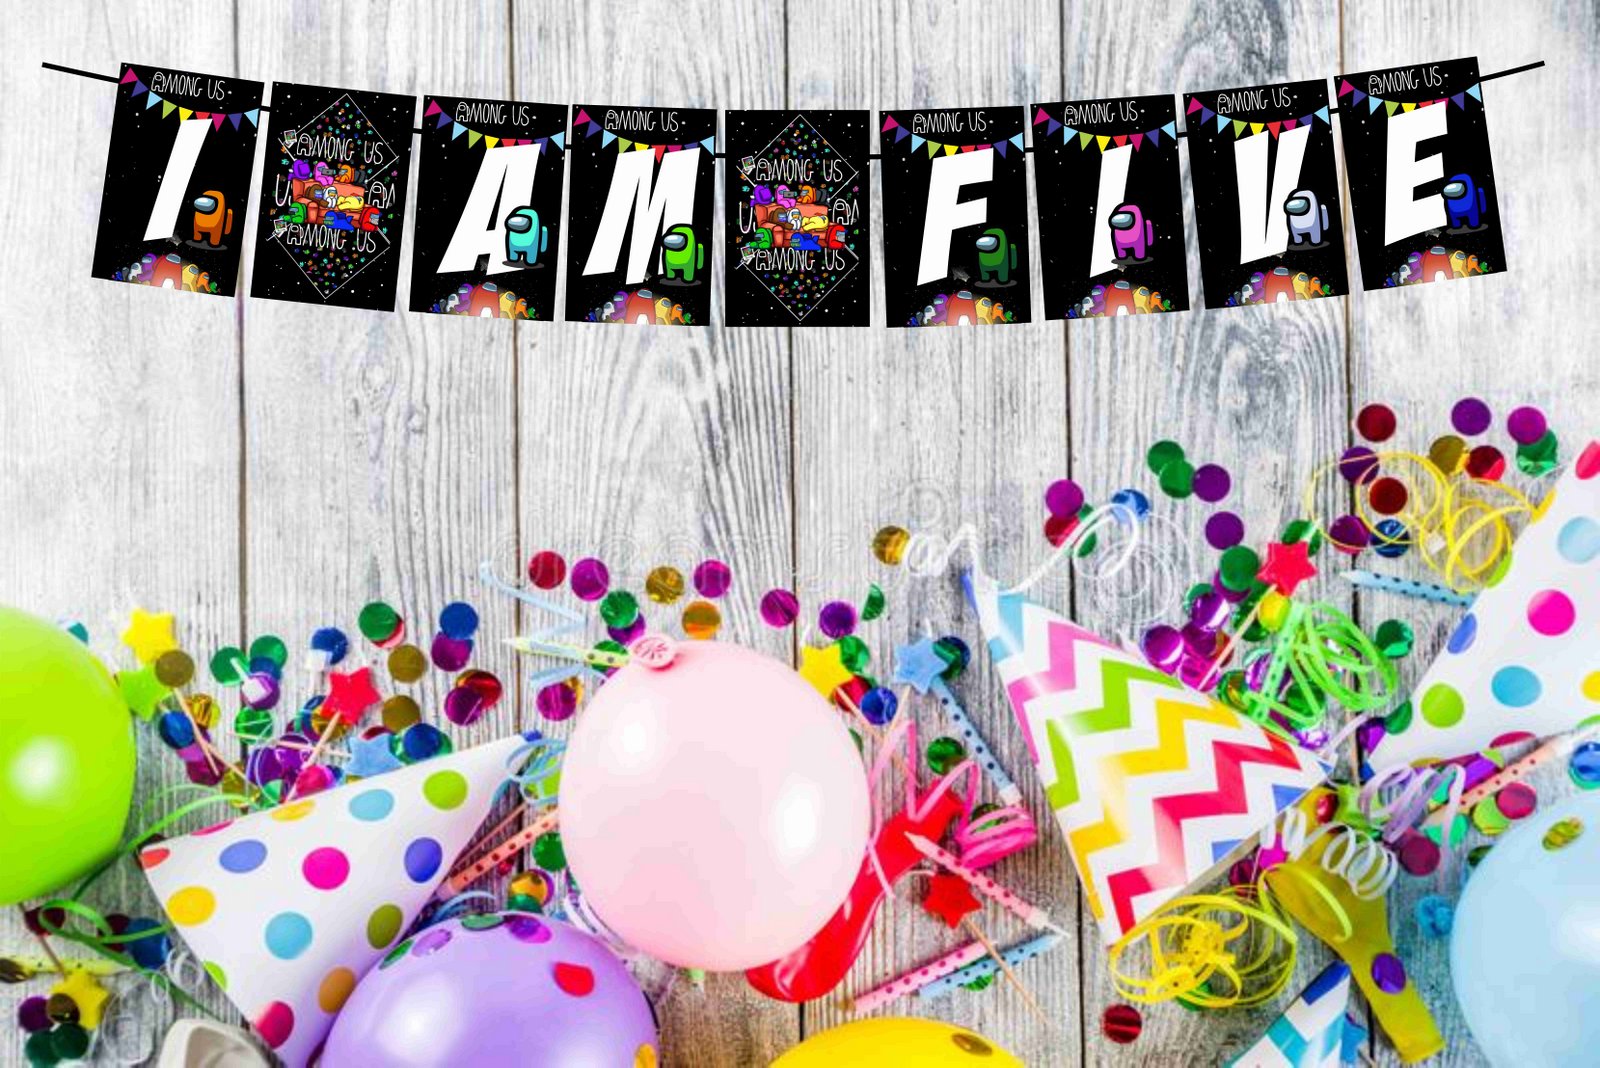 Among Us I Am Five 5th Birthday Banner for Photo Shoot Backdrop and Theme Party - Balloonistics